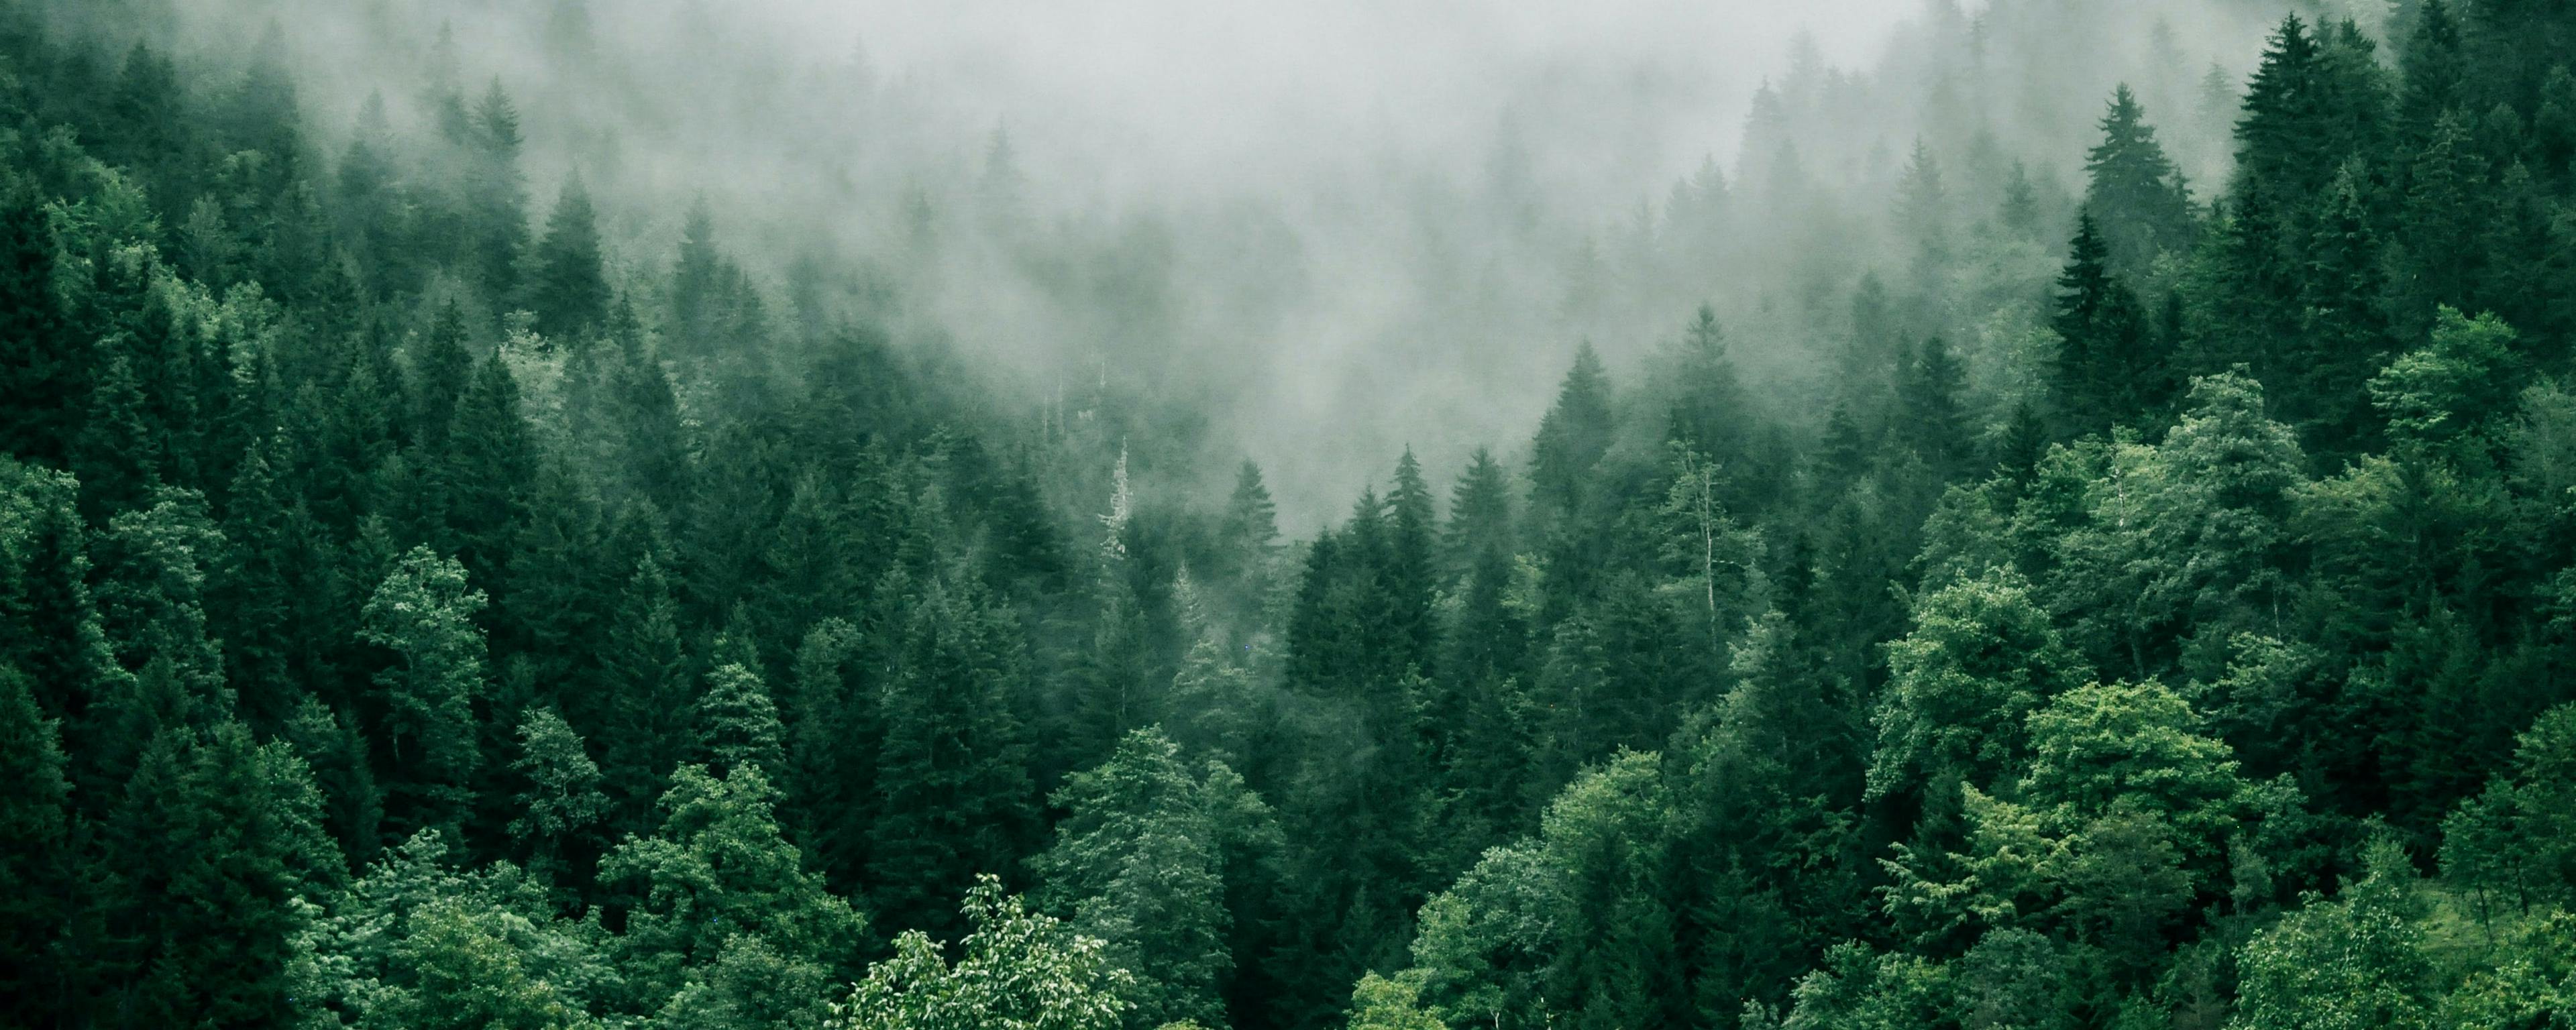 Green trees in a forest, with misty clouds